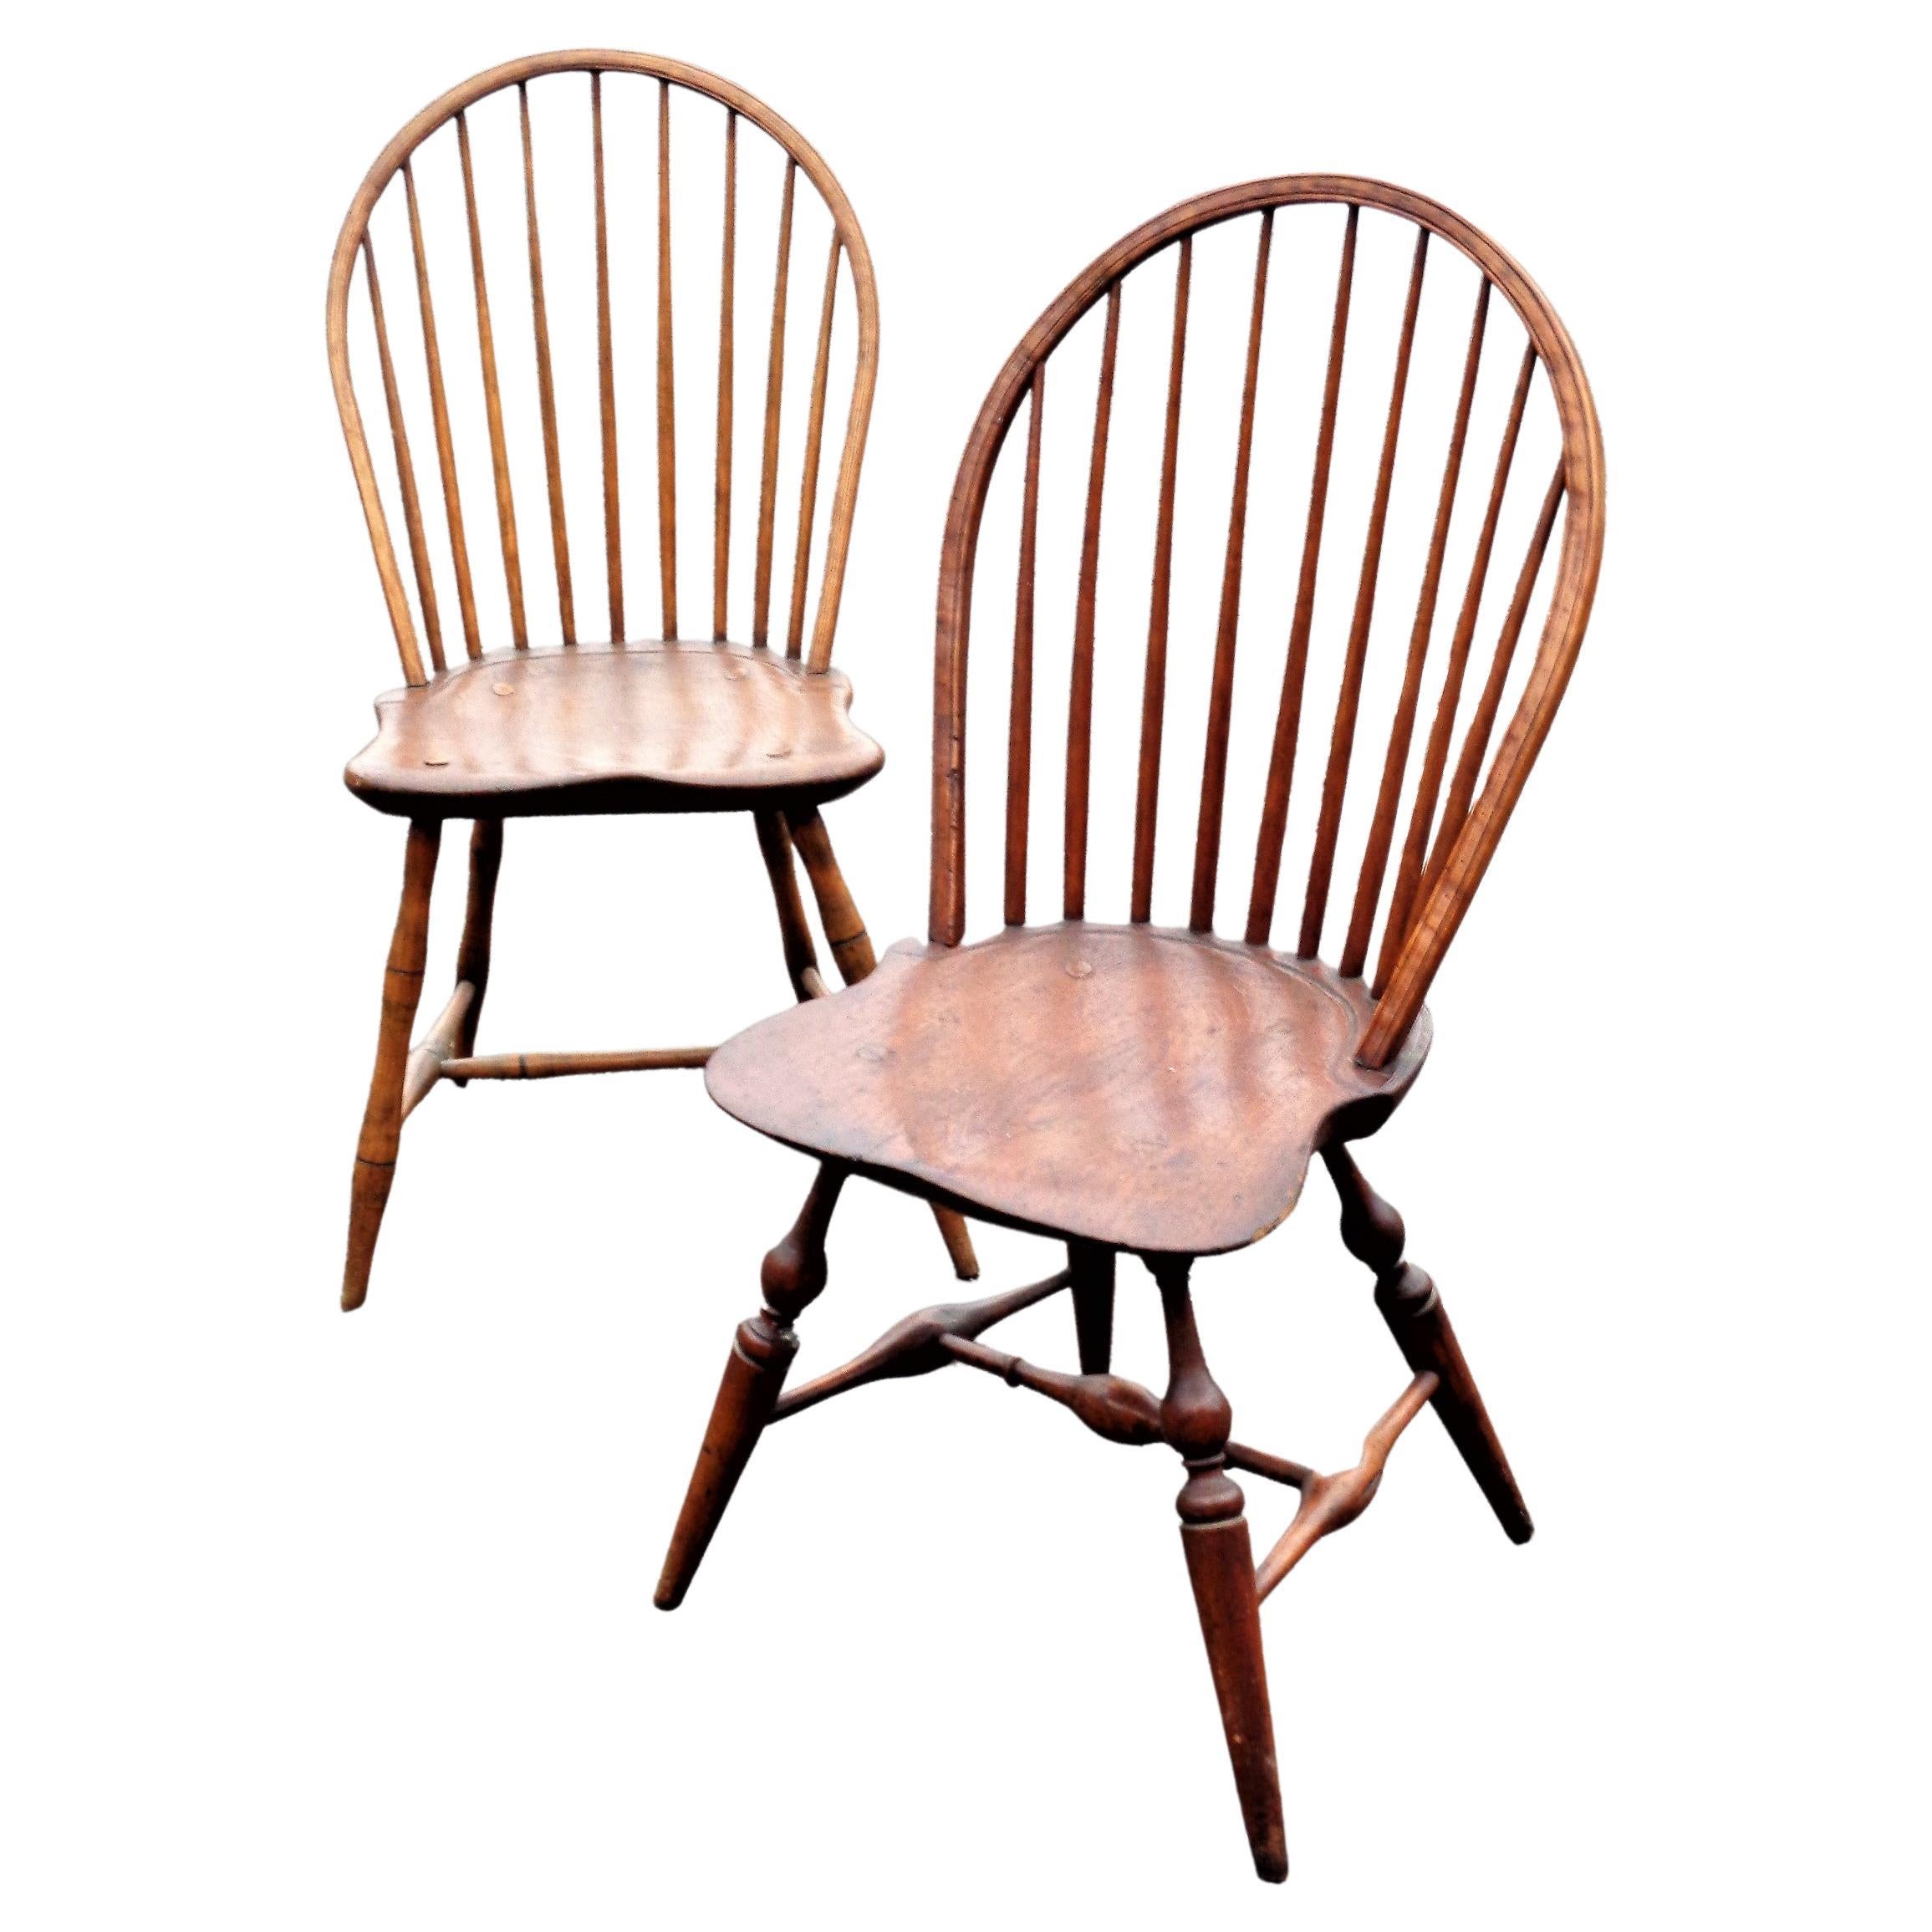  18th Century American Bow Back Windsor Chairs